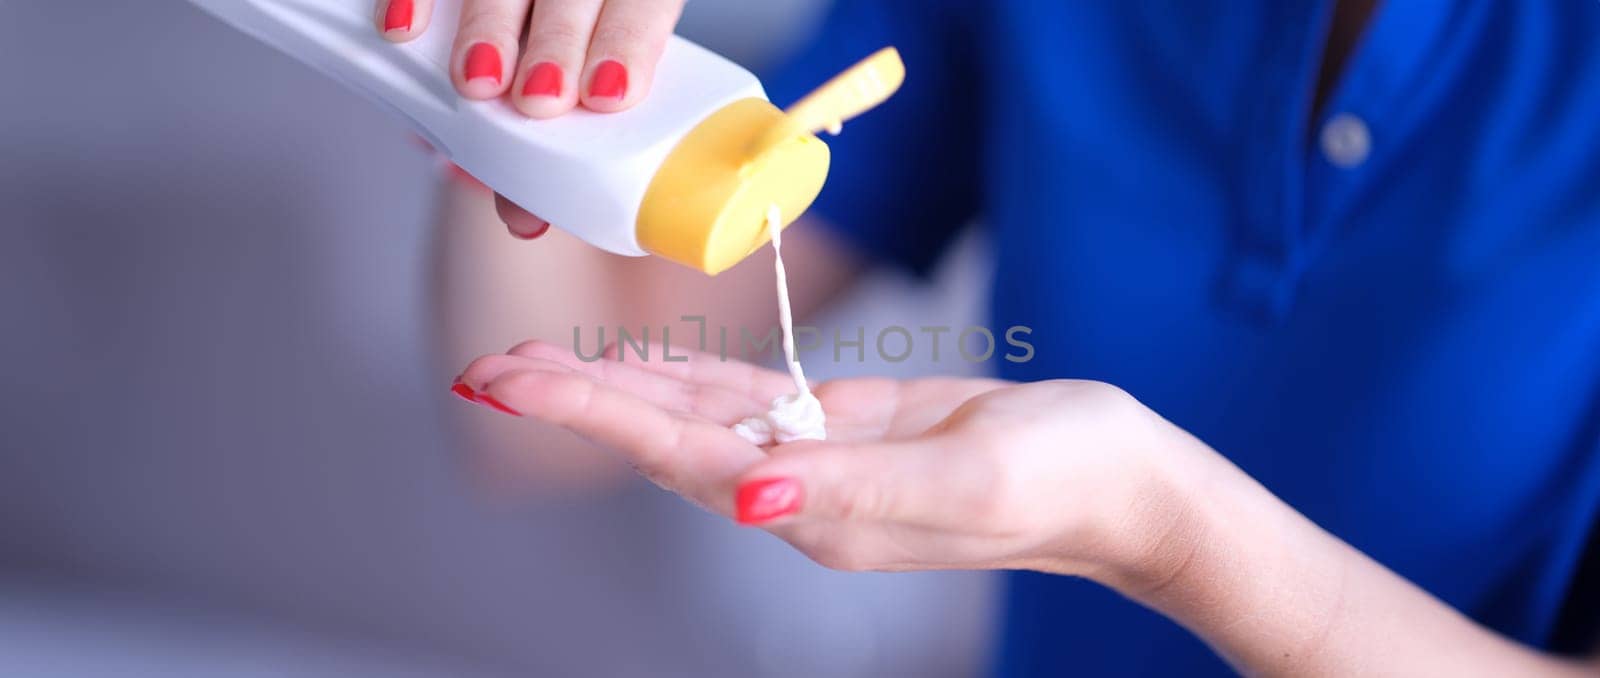 Woman pours body care lotion or sunscreen from bottle into hand. Moisturizing and protecting skin concept